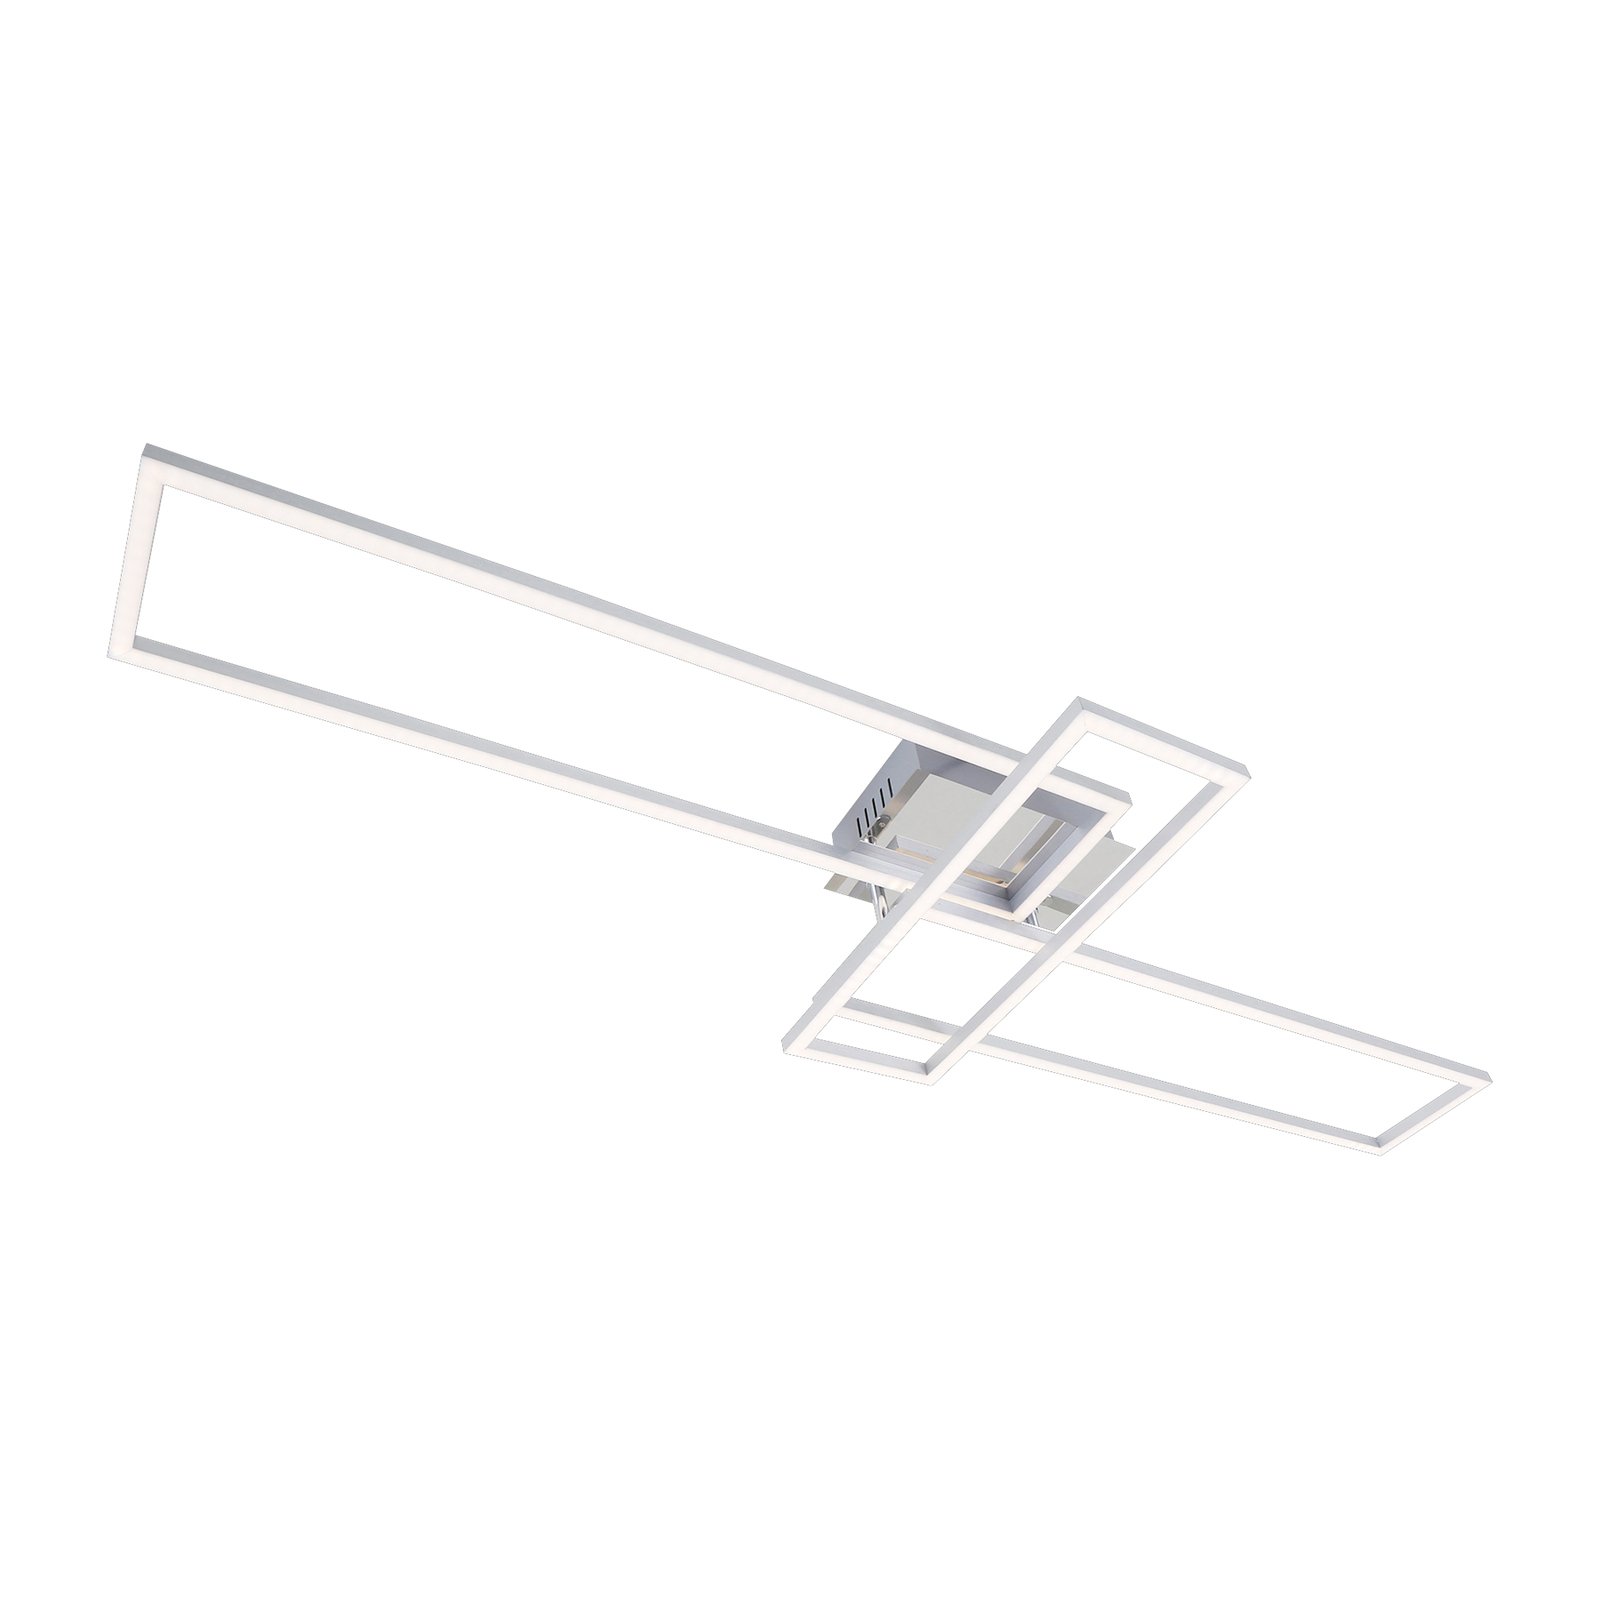 3154-018 LED ceiling light CCT, remote control